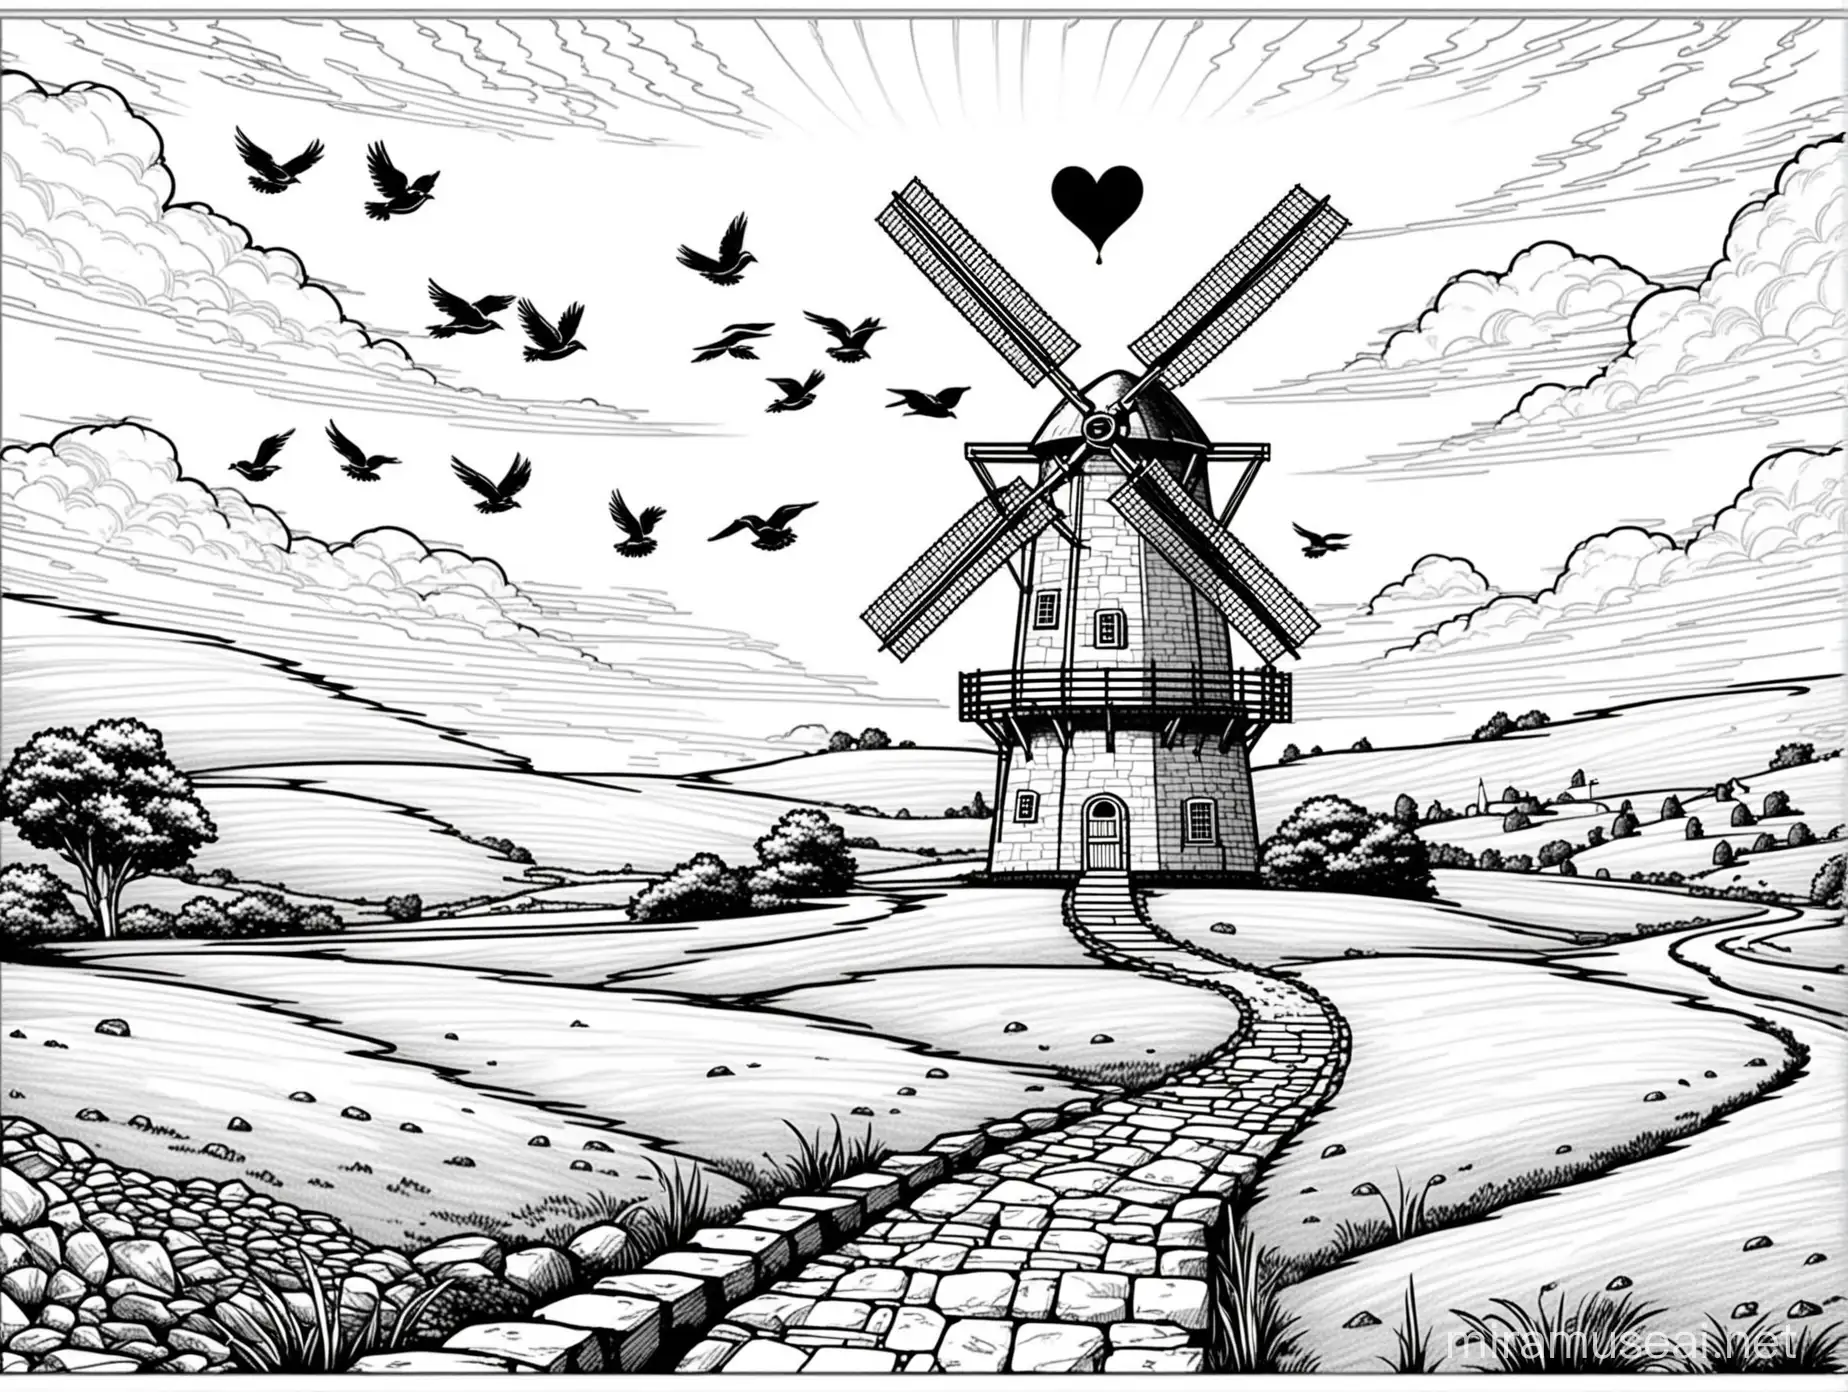 Coloring Page: 

Windmill:

Use bold black outlines.
The windmill tower could be a squat cylinder with a rounded top.
A tiny, crooked door with a heart-shaped window sits at the base of the windmill.
Atop the windmill is a whimsical weathervane.

Details:

Around the base of the windmill, a winding path paved with stones leads uphill.
In the distance, a flock of birds soars across the sky.

Coloring Freedom:  This coloring page offers plenty of space for creativity.  No colors used, except black and white.  Clear lines.  High contrast.  No shading.